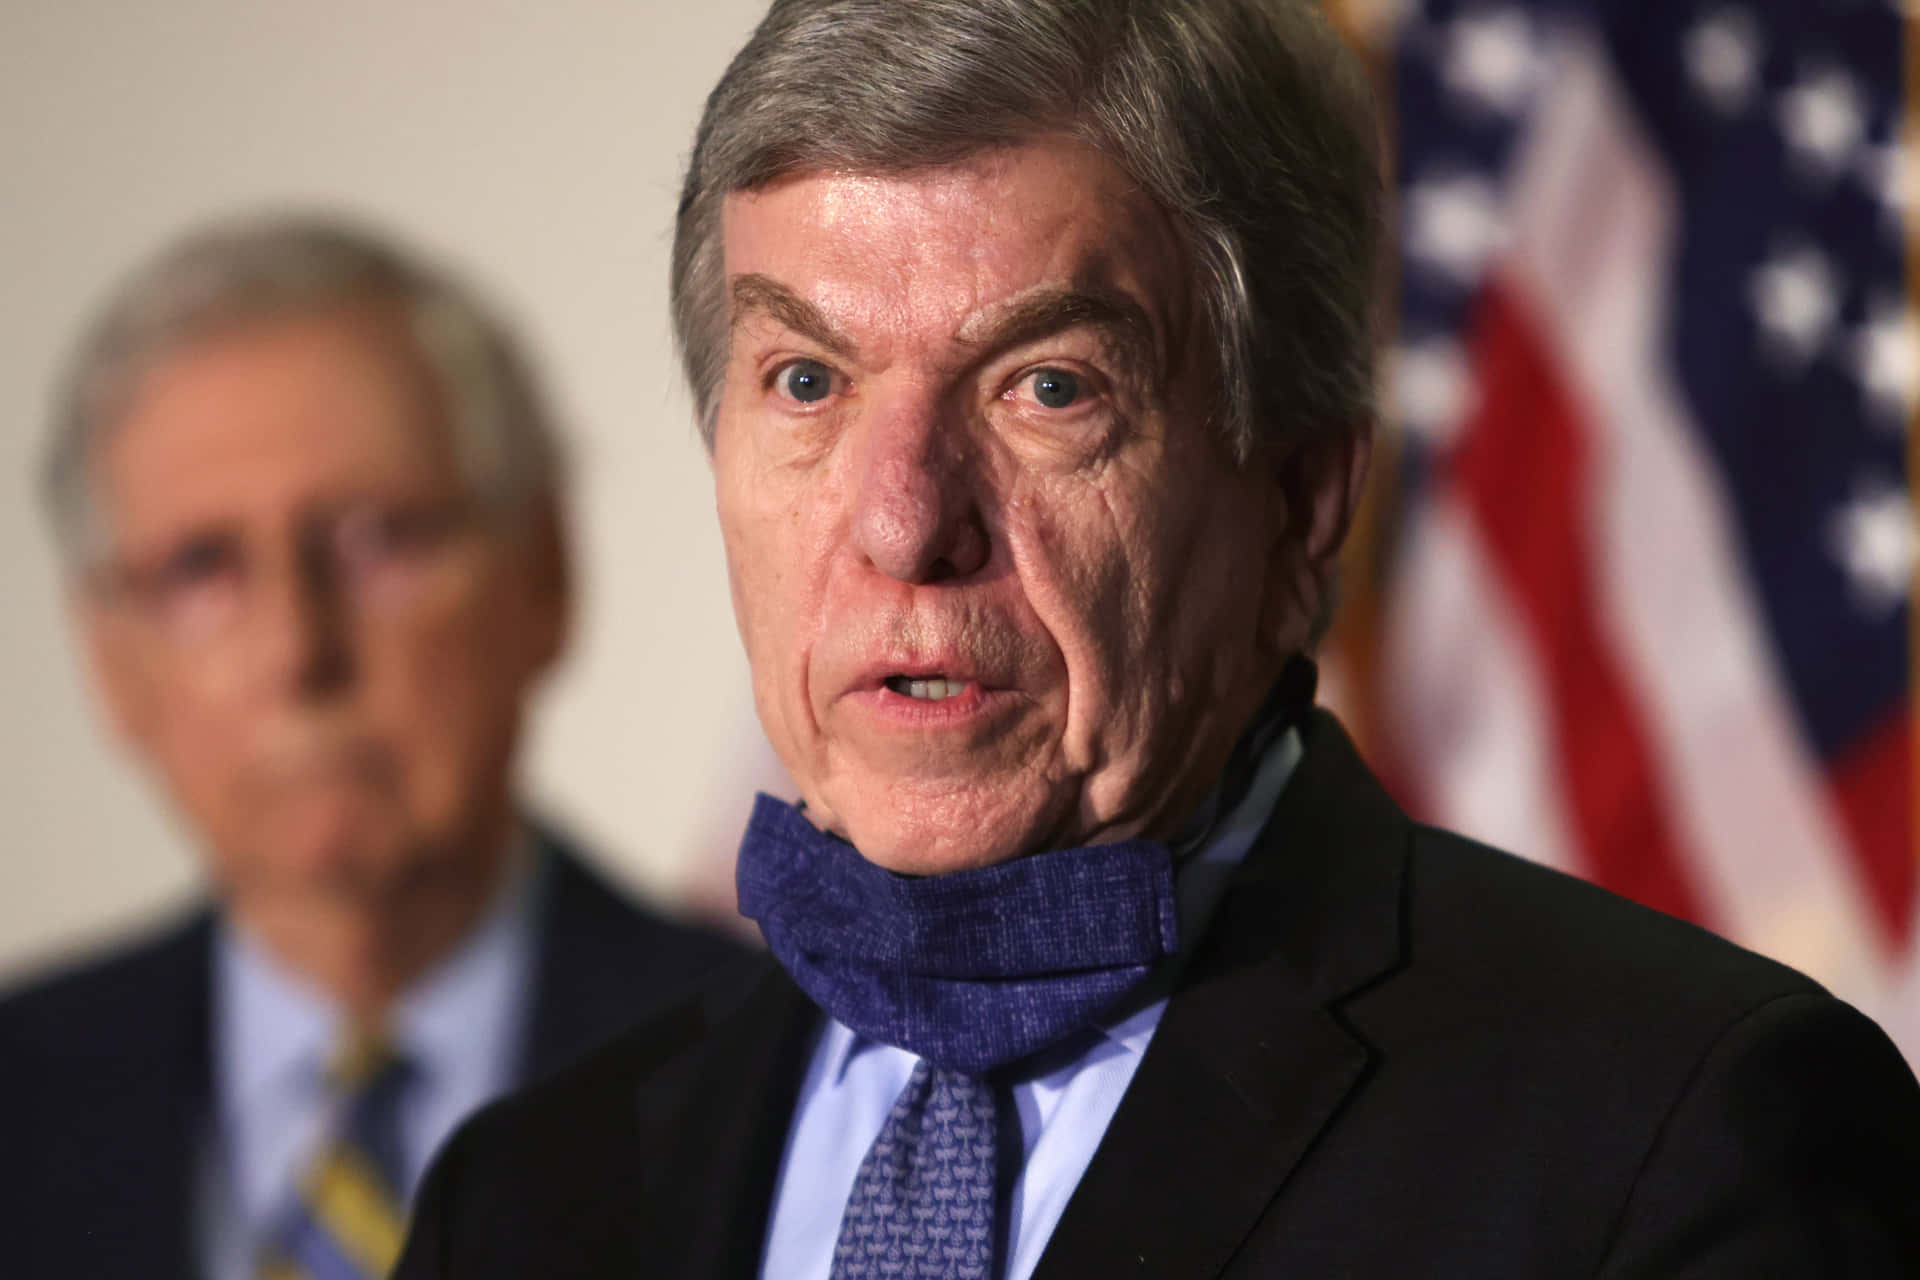 'U.S. Senator Roy Blunt with face mask under his chin' Wallpaper